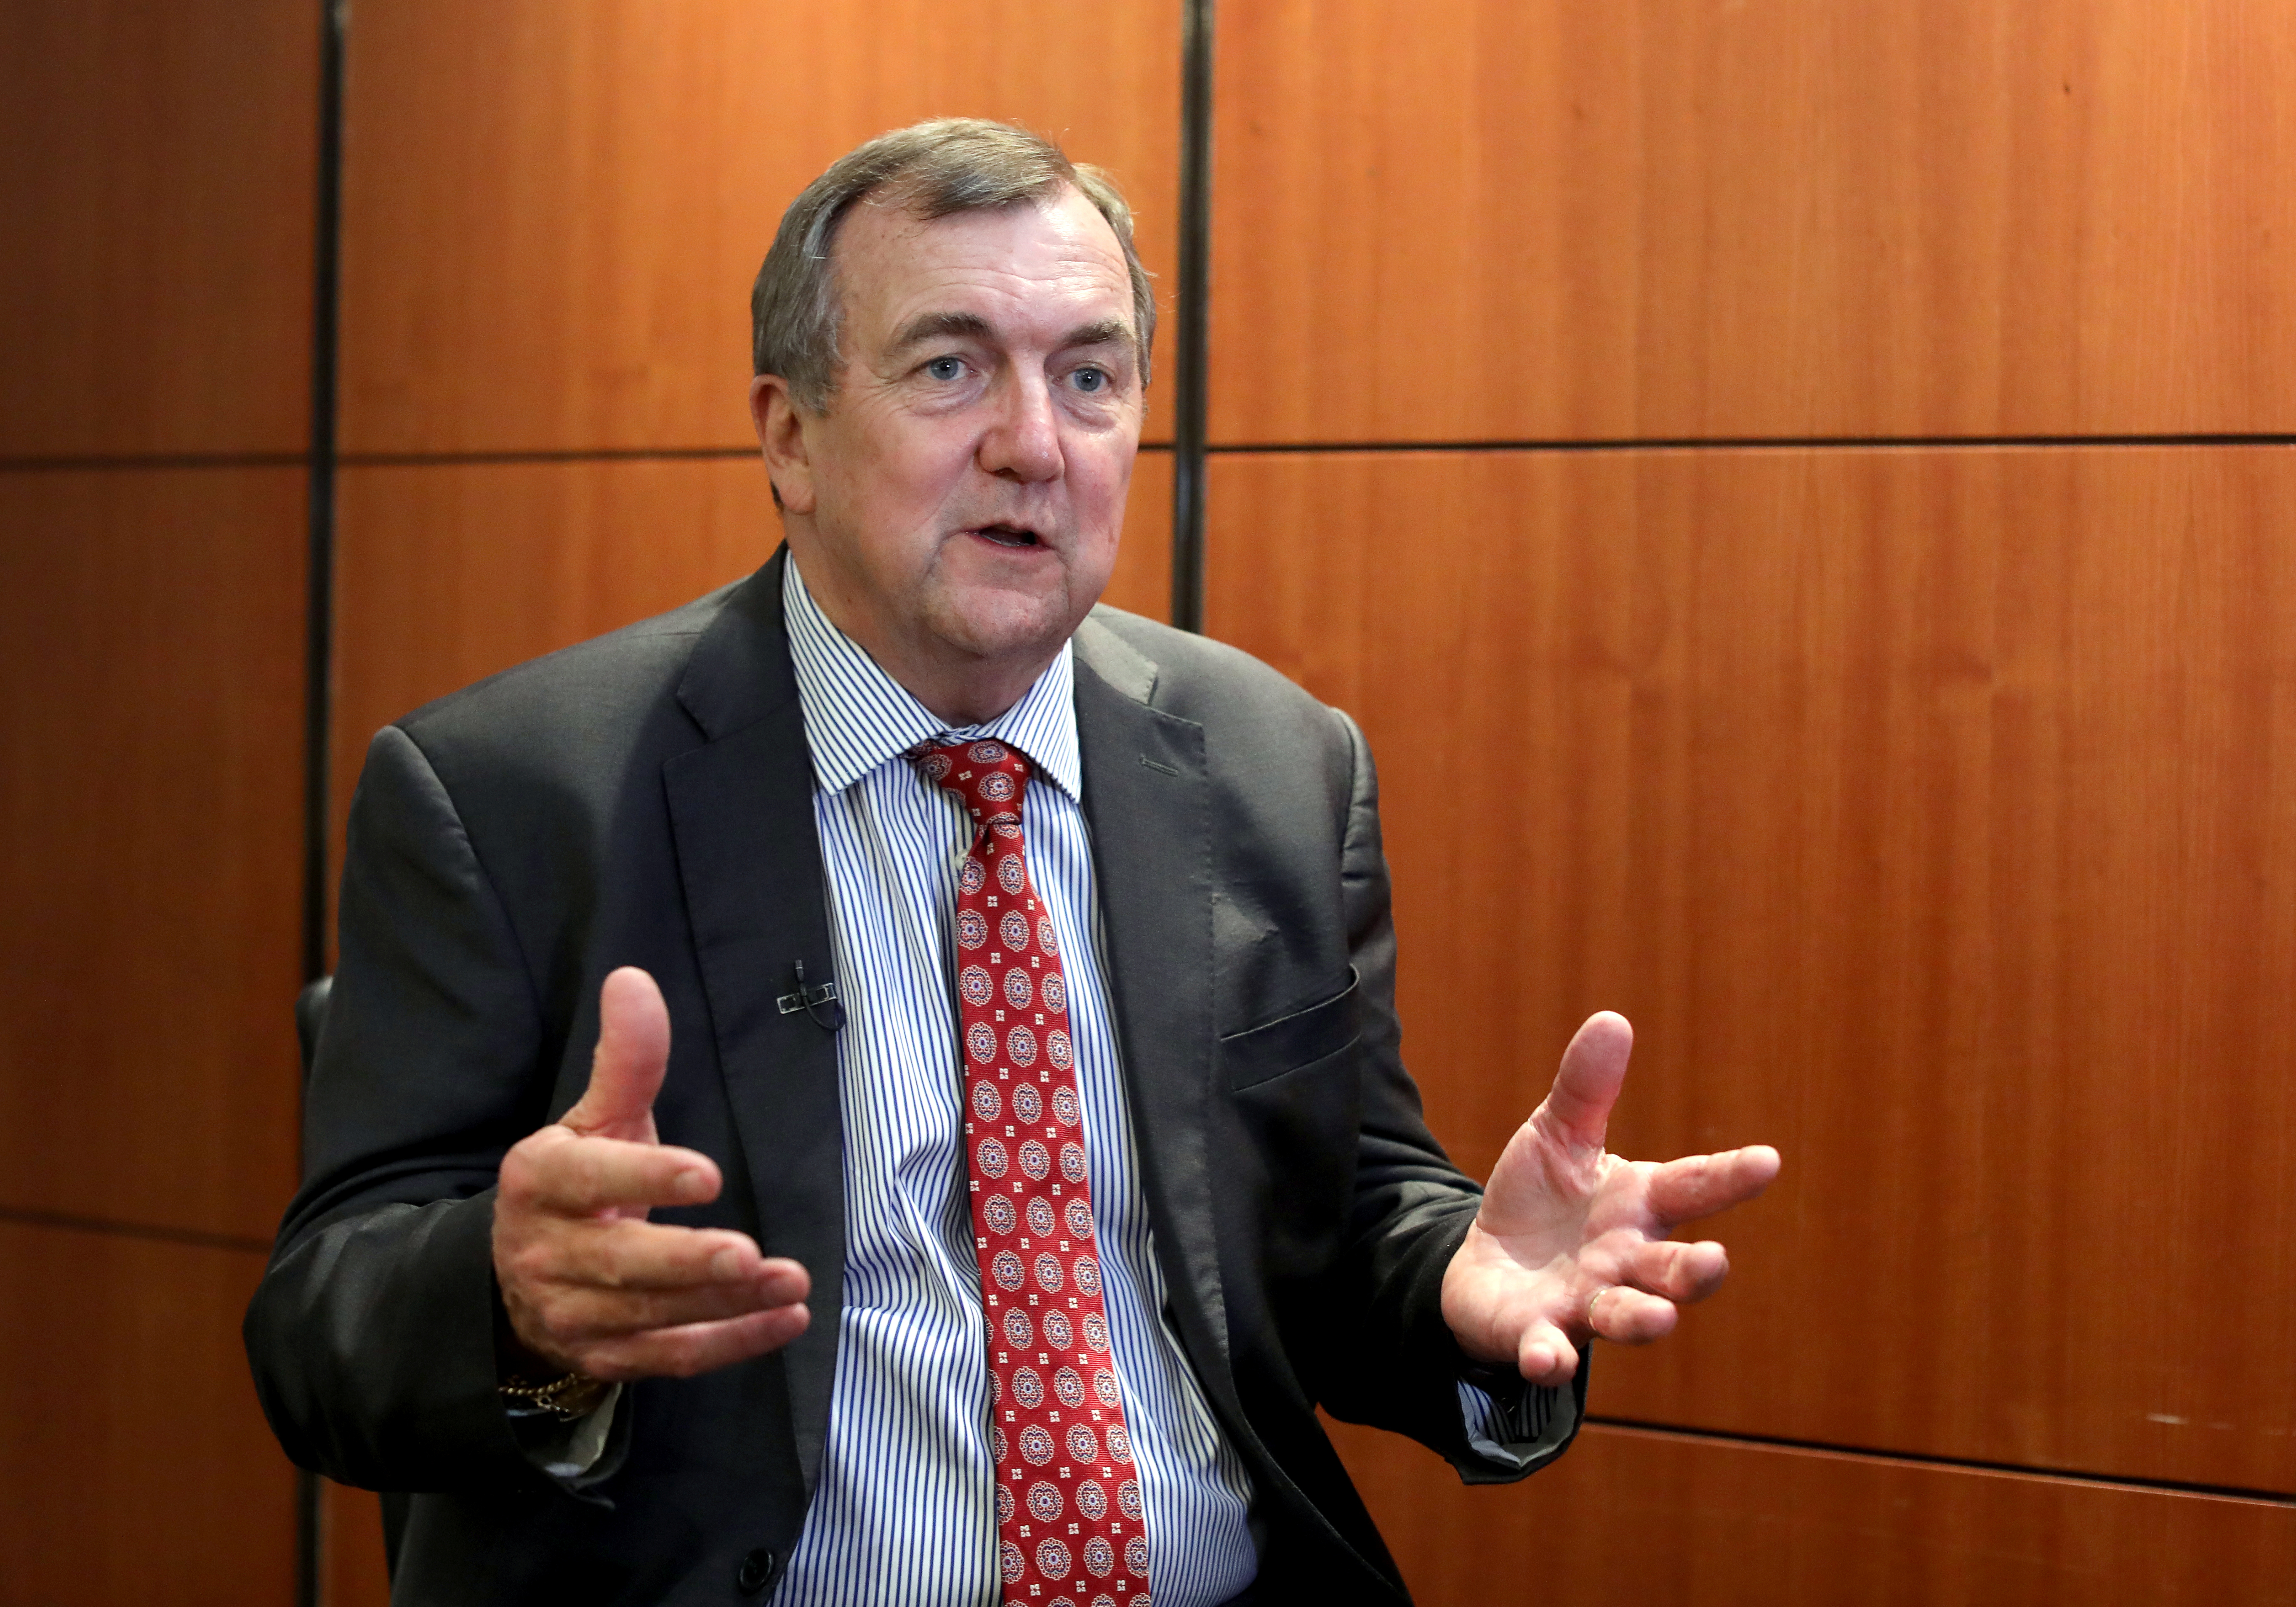 Mark Bristow, chief executive officer of Barrick Gold, speaks during an interview at the Investing in African Mining Indaba conference in Cape Town